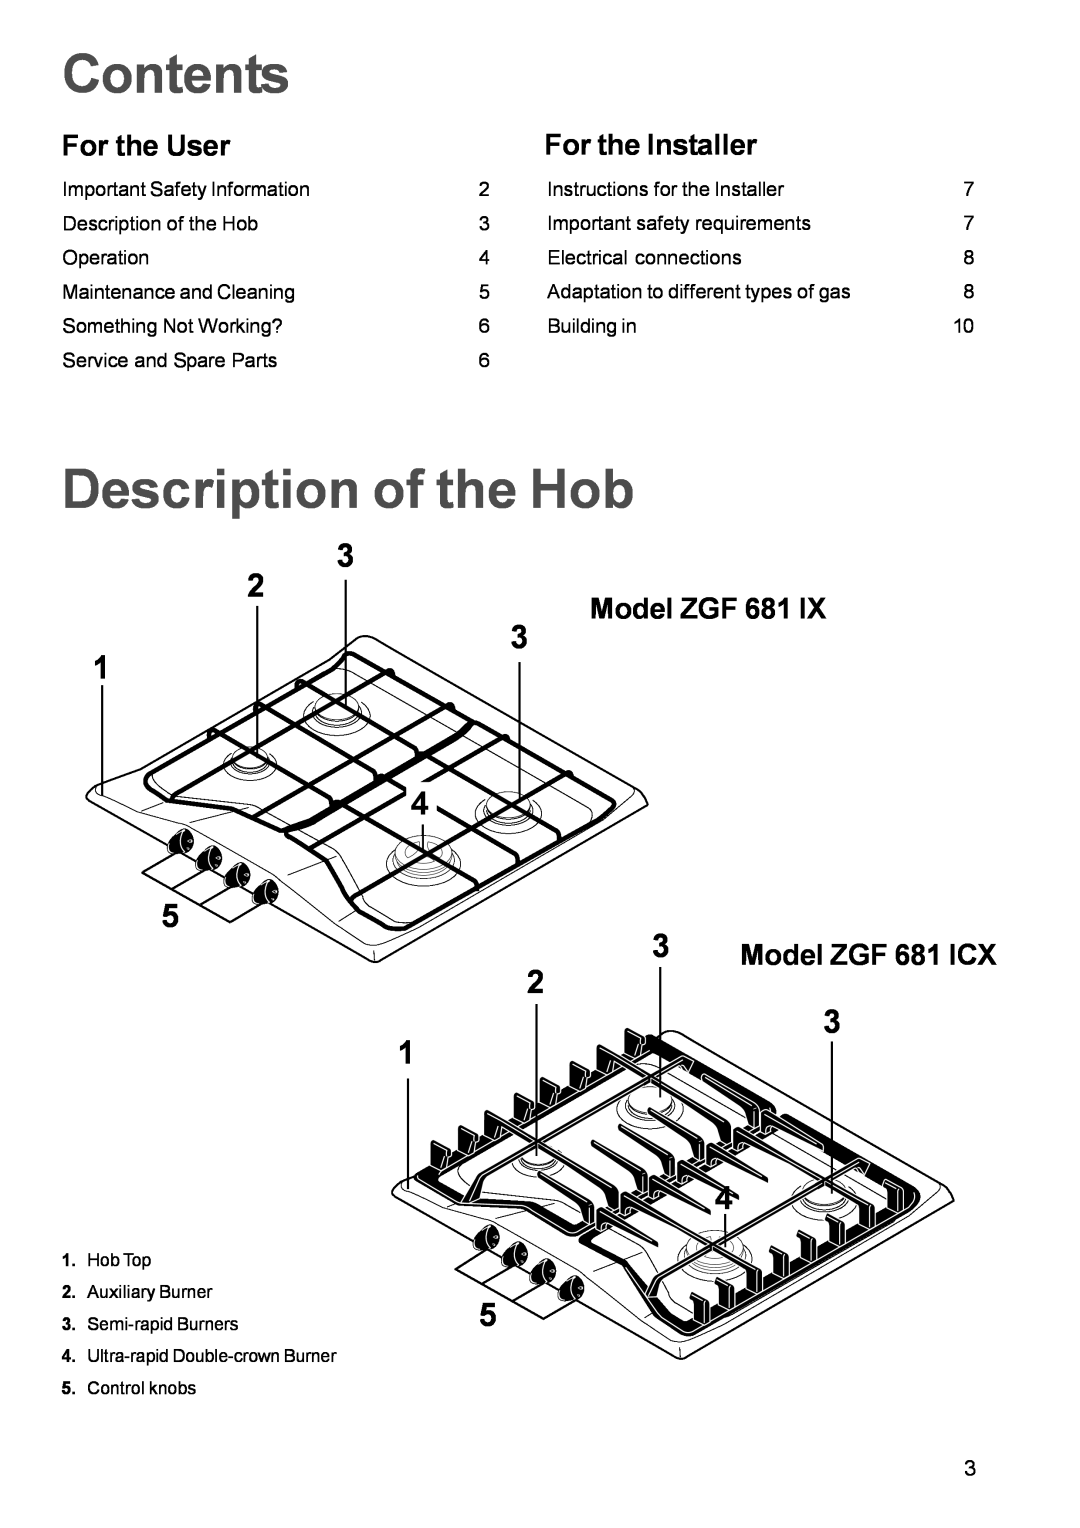 Zanussi manual Contents, Description of the Hob, For the User, For the Installer, Model ZGF 681 ICX 